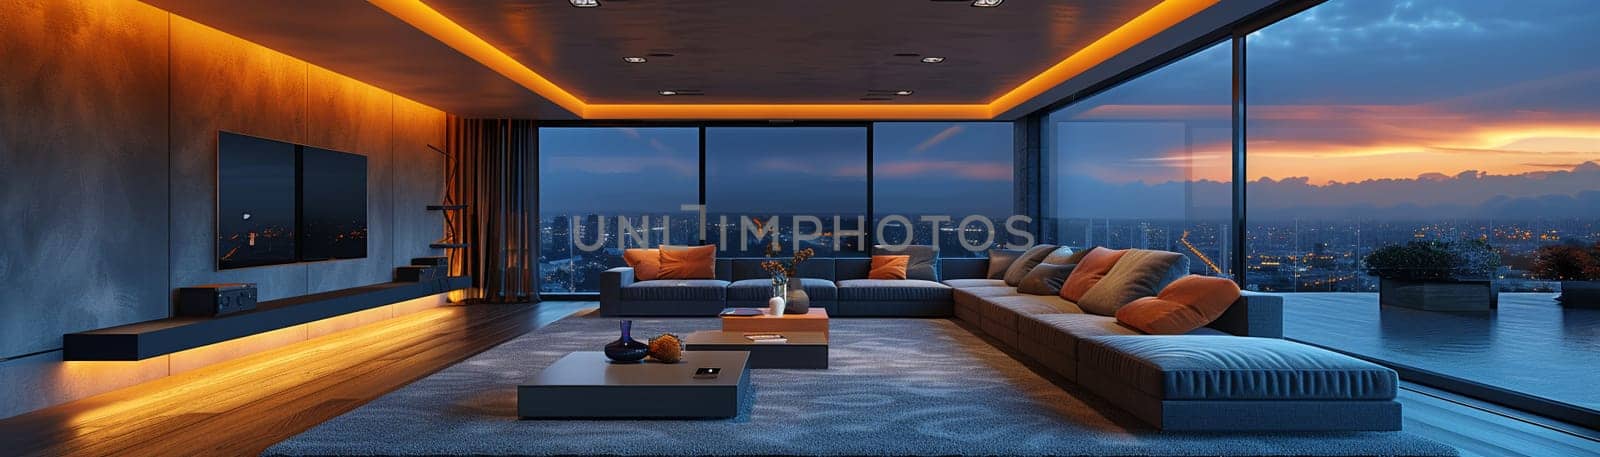 High-tech smart home living room with integrated technology and sleek furnitureup32K HD